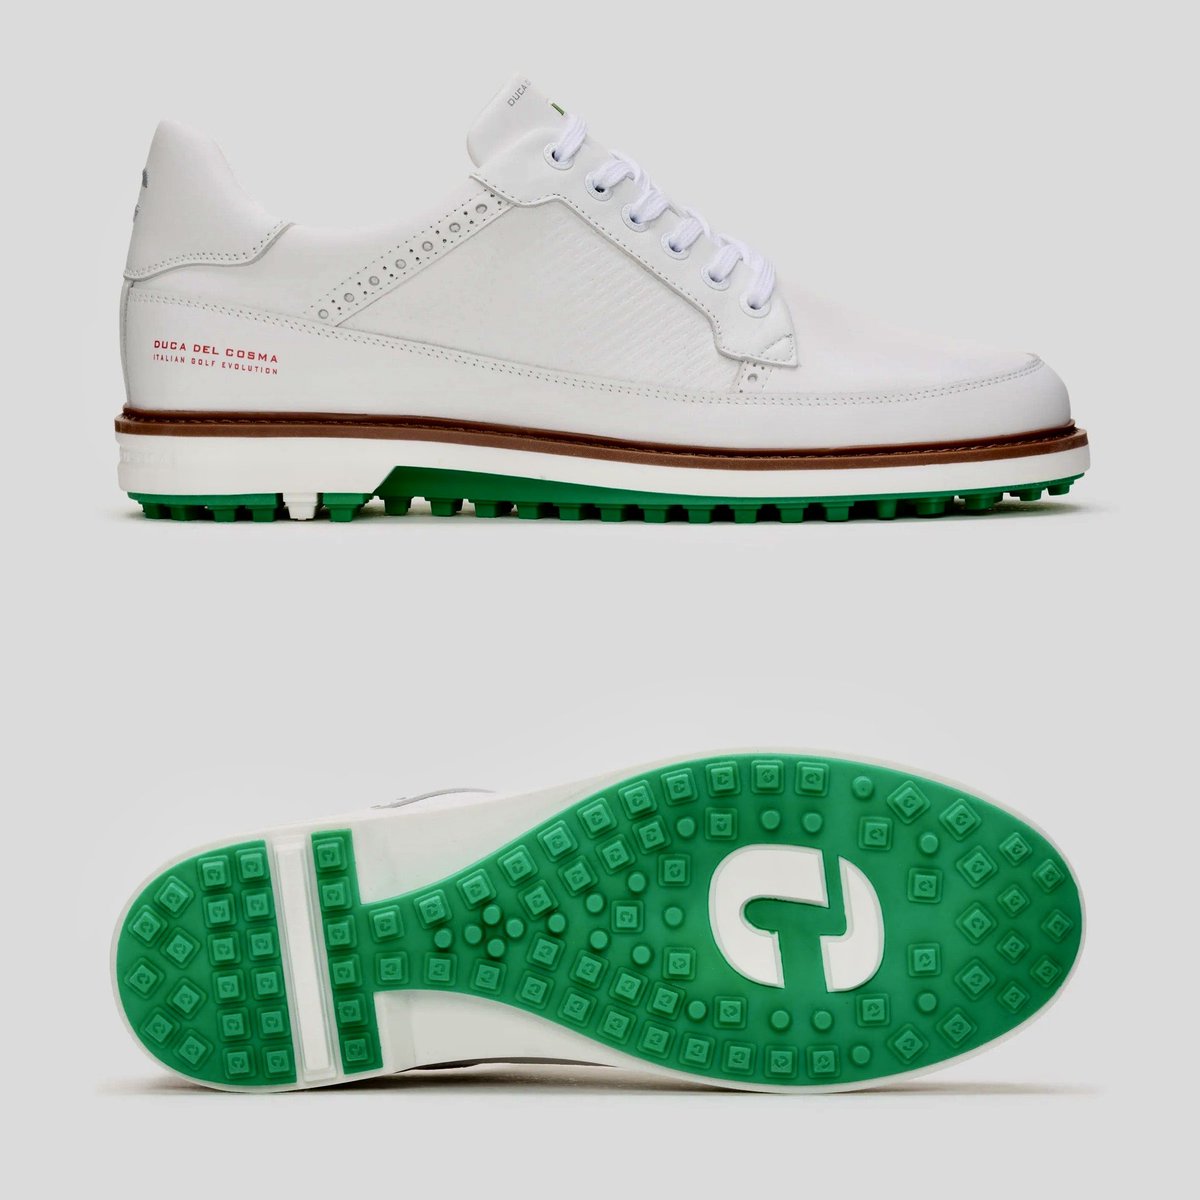 And yes of course you can also choose these Masters inspired shoes. 😁💯👍